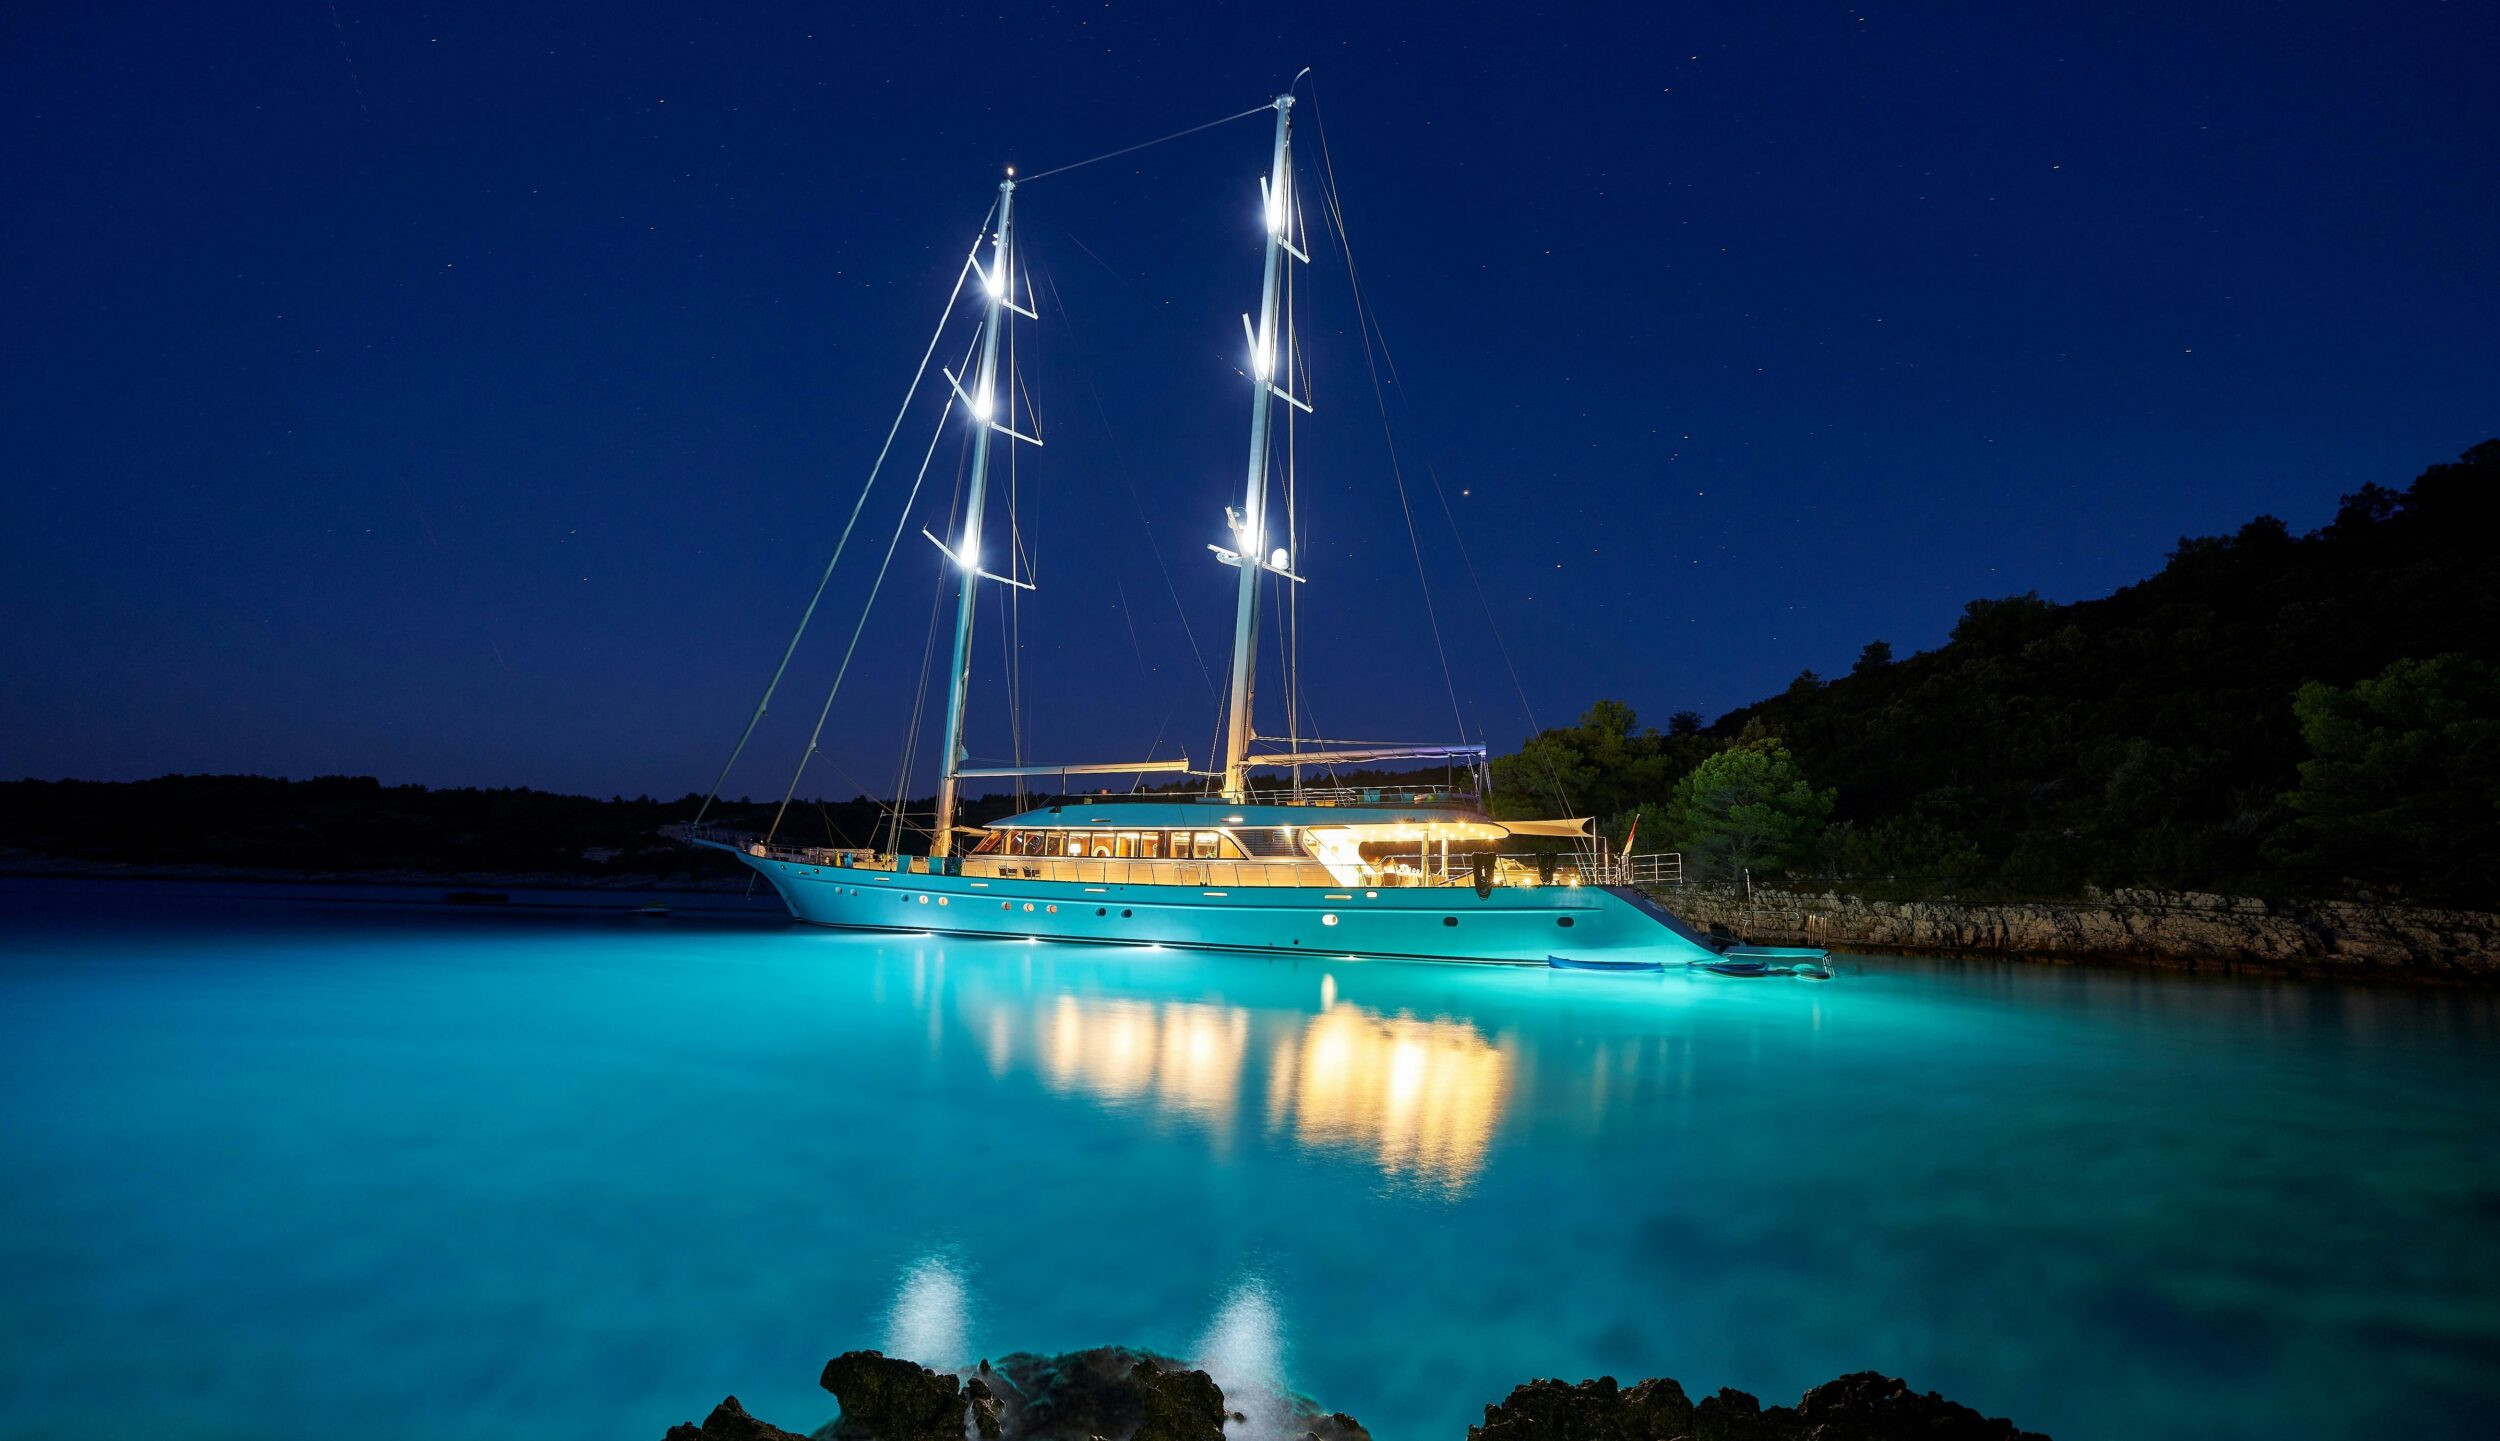 How to get started in yachting